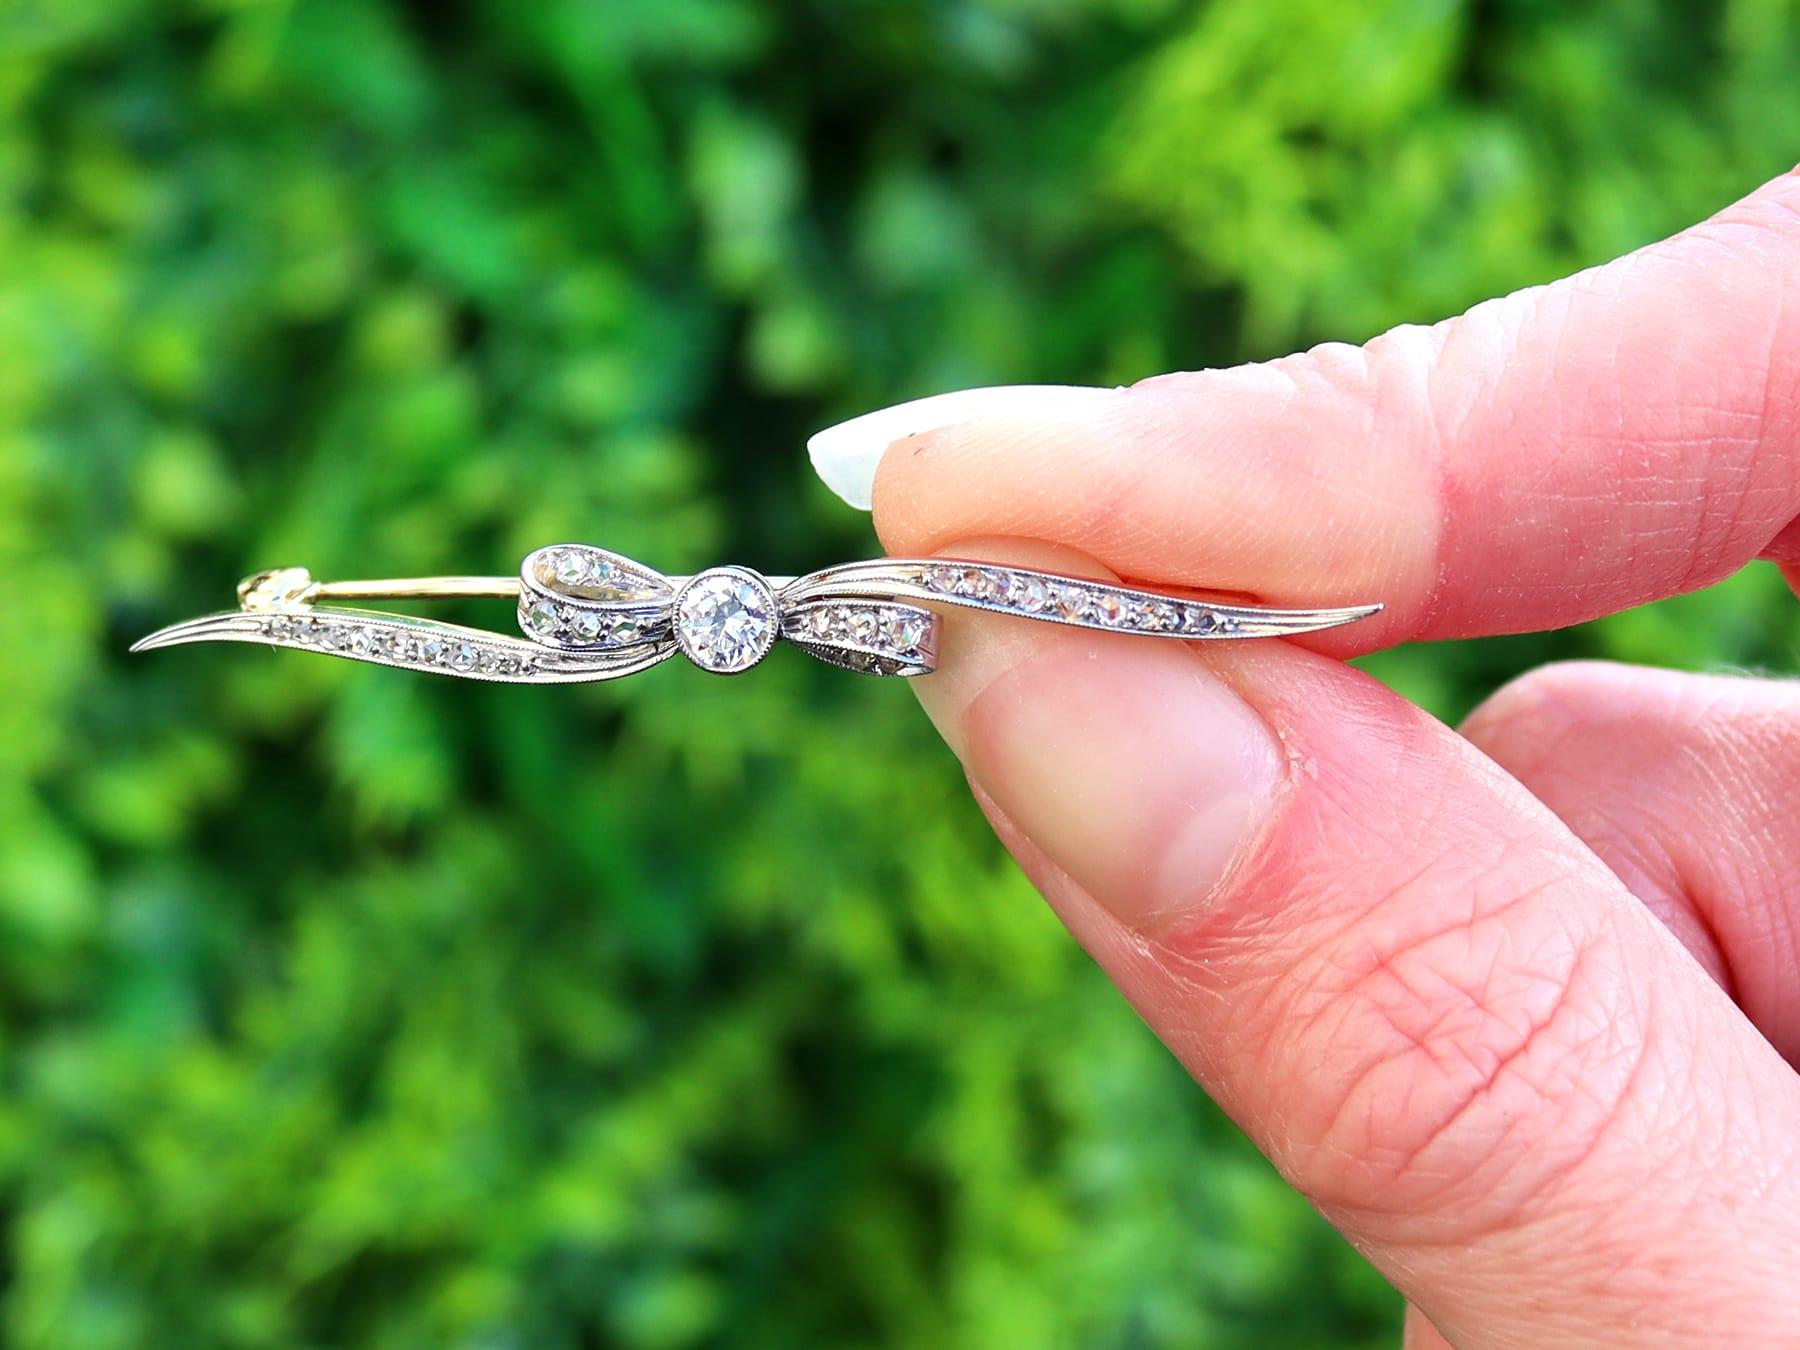 An impressive 0.68 carat diamond and 14 carat yellow gold, 14 karat white gold set bar brooch in the form of a bow; part of our diverse antique jewelry collections.

This fine and impressive antique bow brooch has been crafted in 14k yellow gold